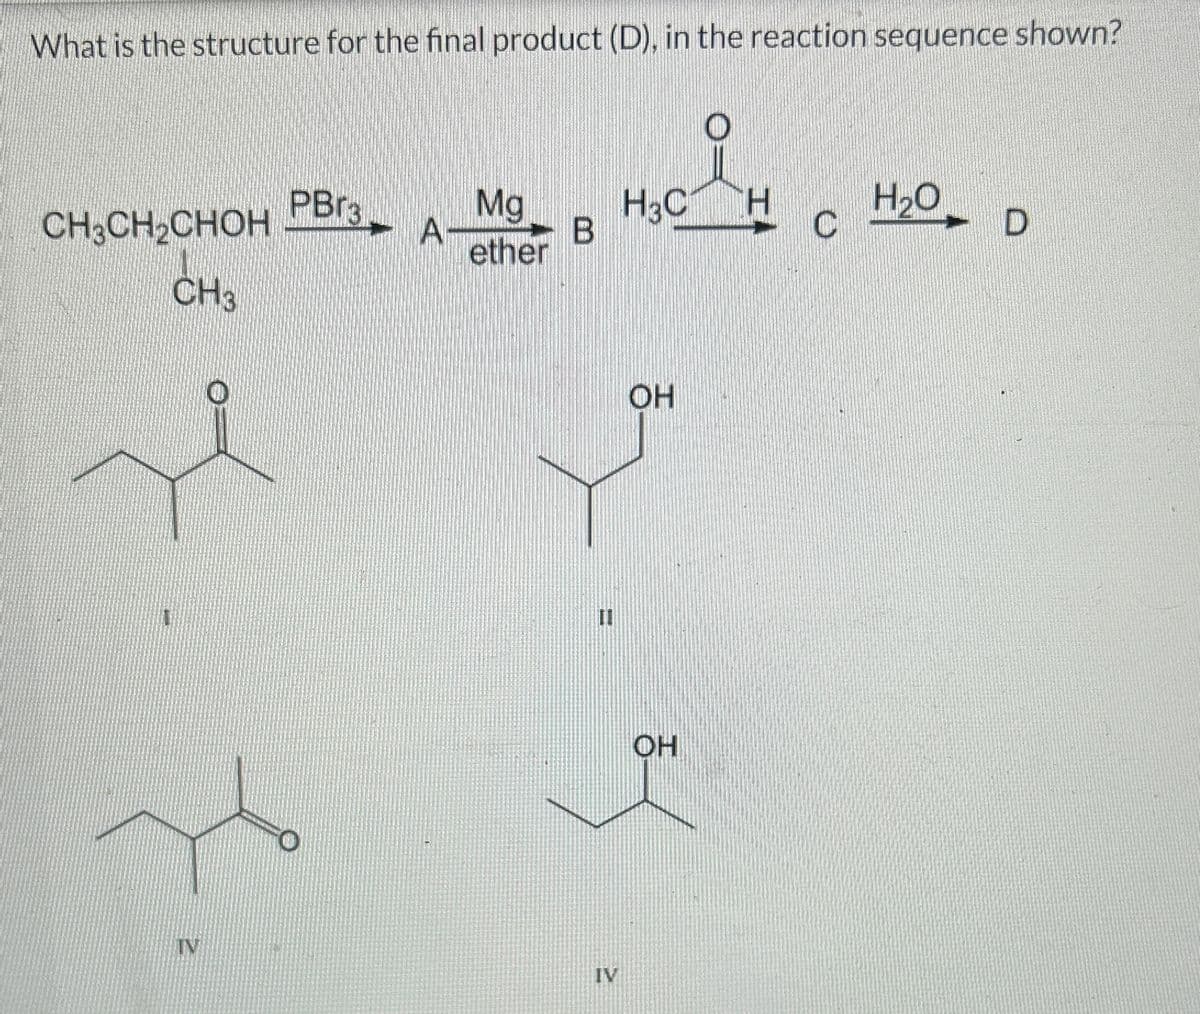 What is the structure for the final product (D), in the reaction sequence shown?
CH3CH₂CHOH
CH3
IV
PBr3.
A
Mg
ether
B
IV
H3C H
OH
OH
H₂O
D